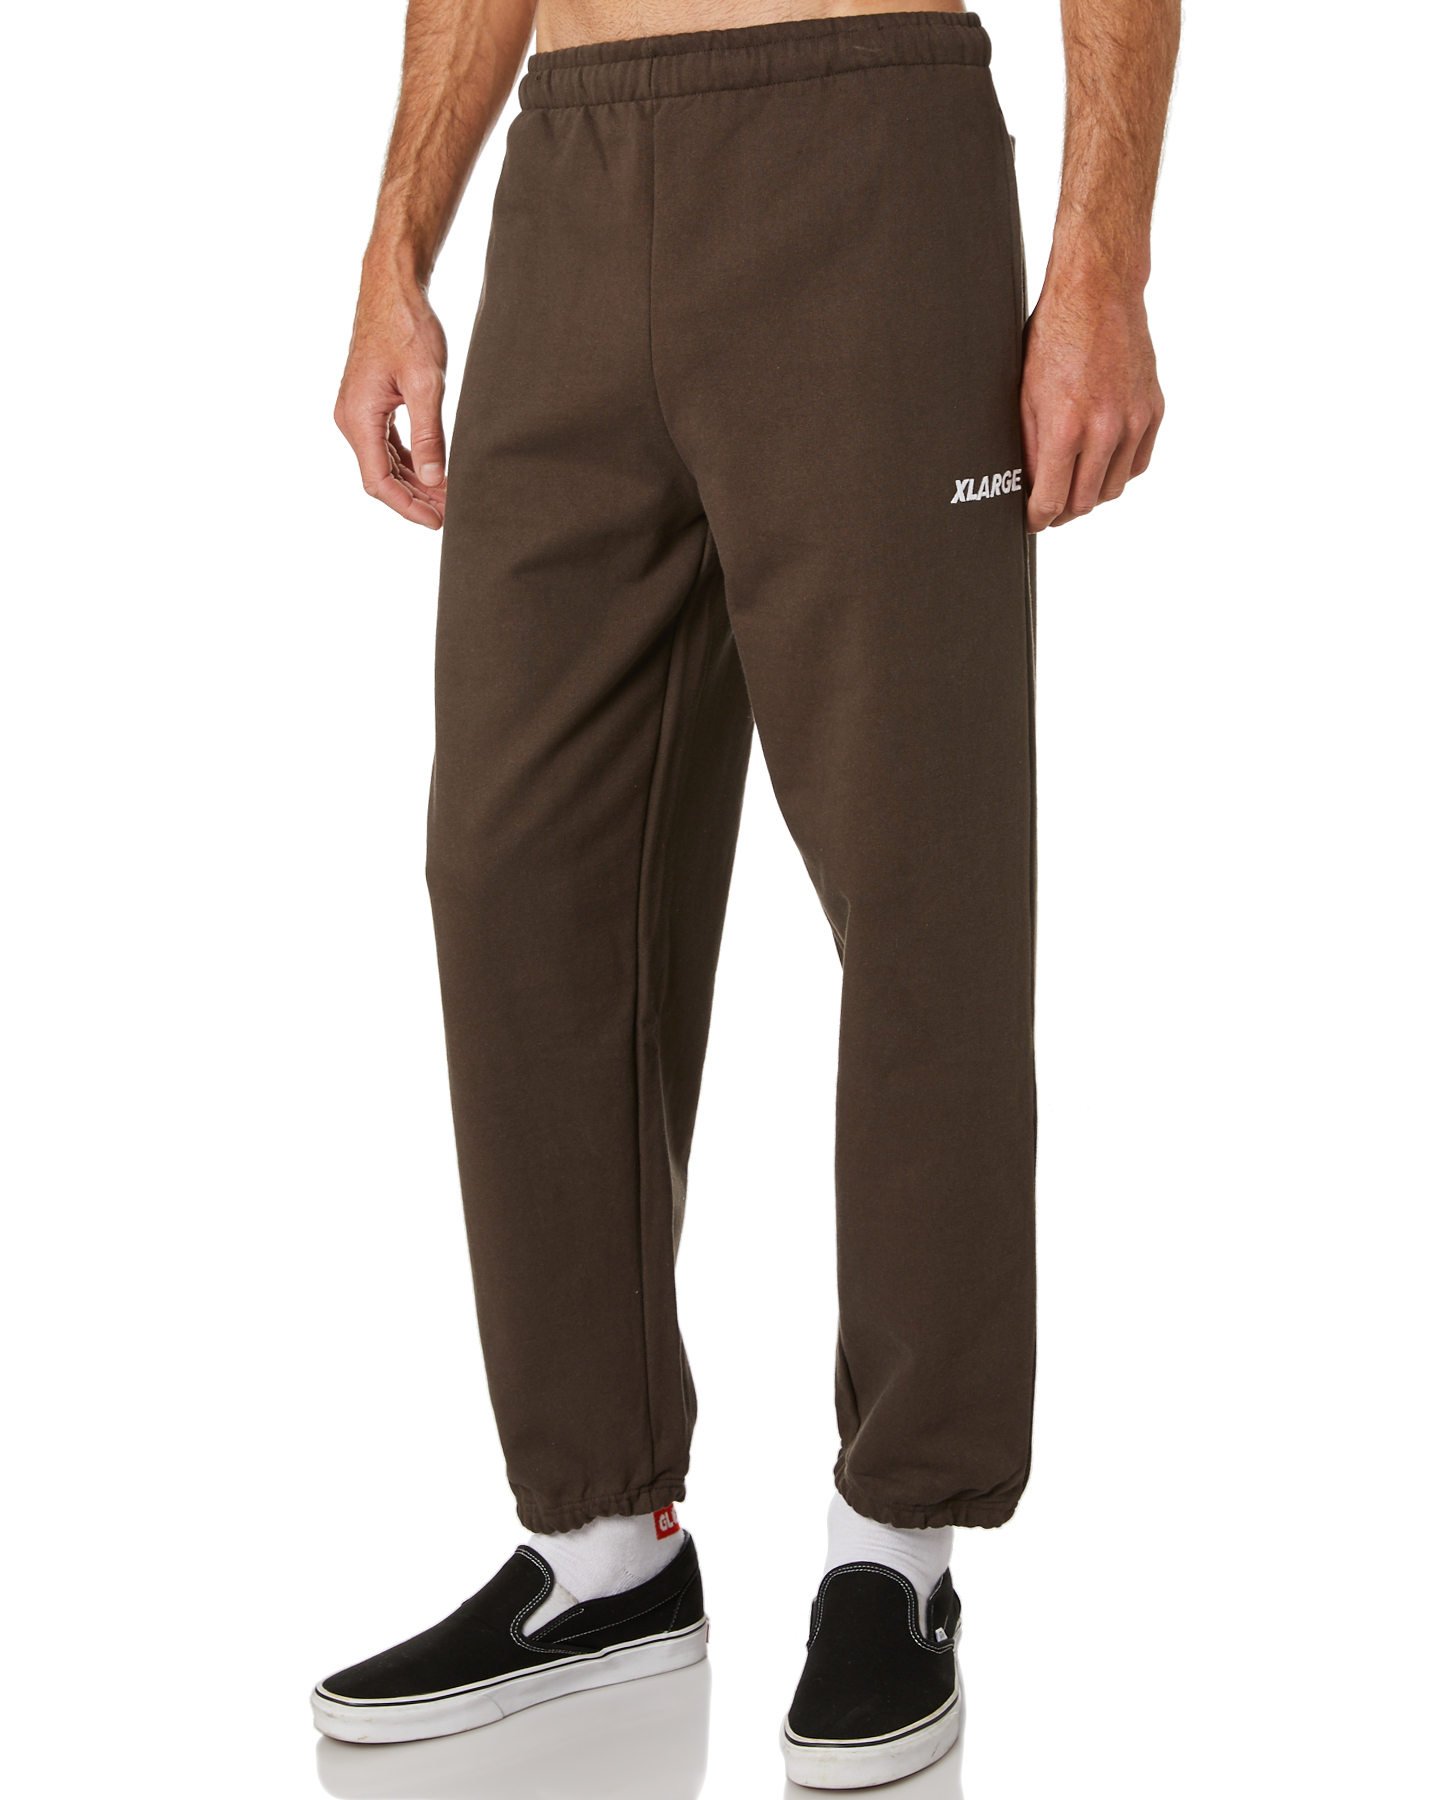 Xlarge Text Mens Sweat Pant - Brown | SurfStitch